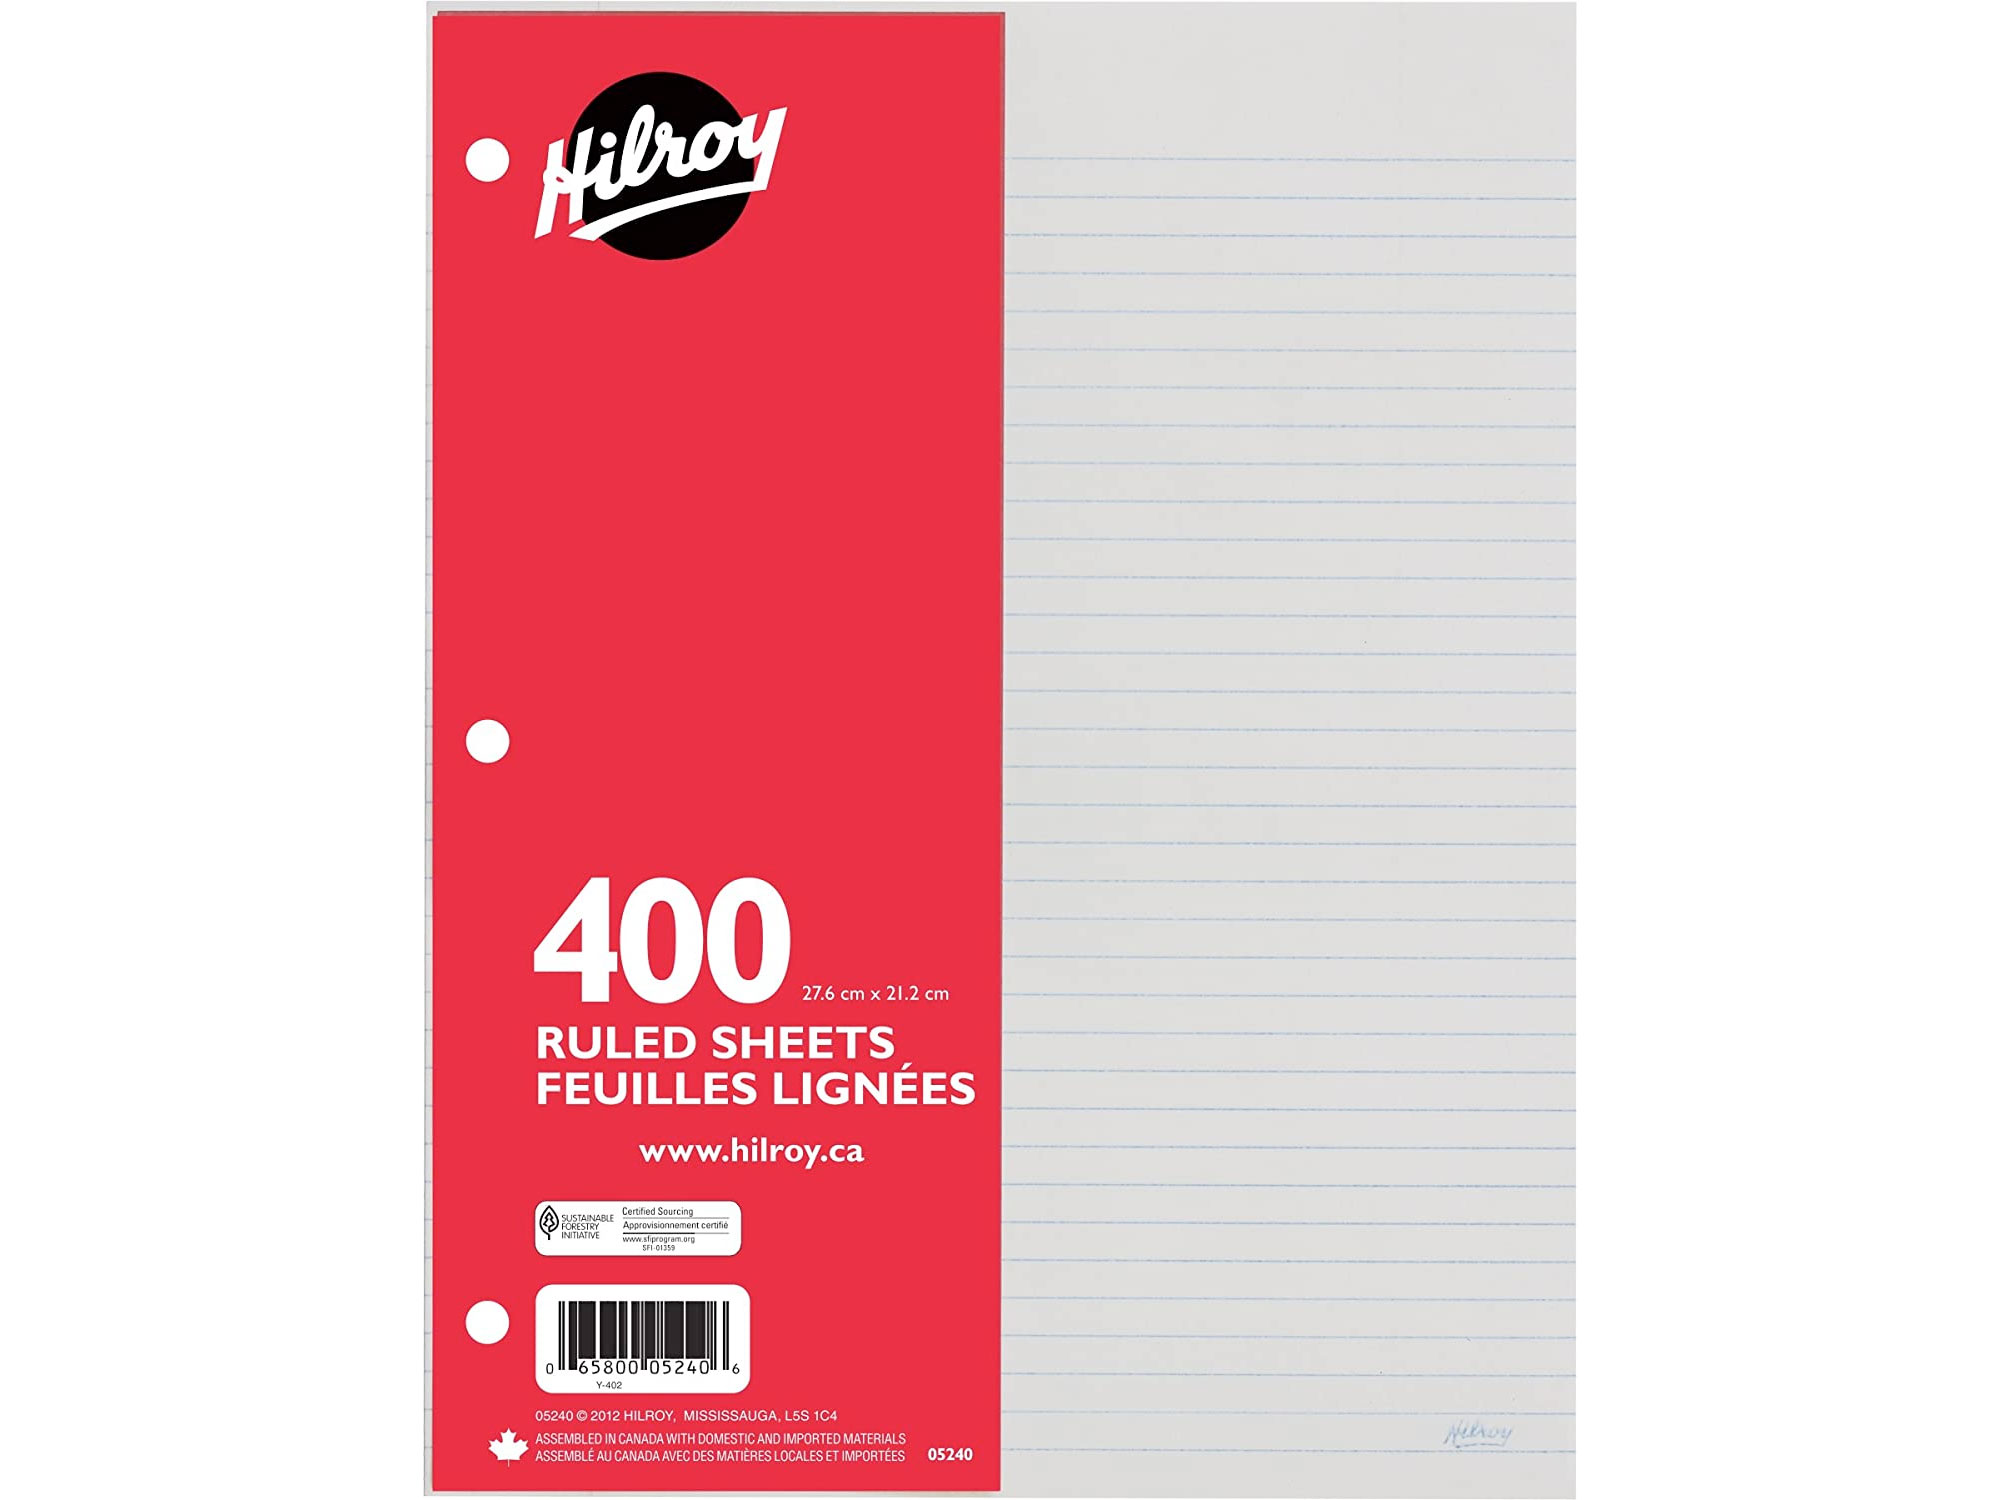 Amazon：Hilroy 3 Hole Punched Ruled Refill Paper (400 sheets)只卖$0.96